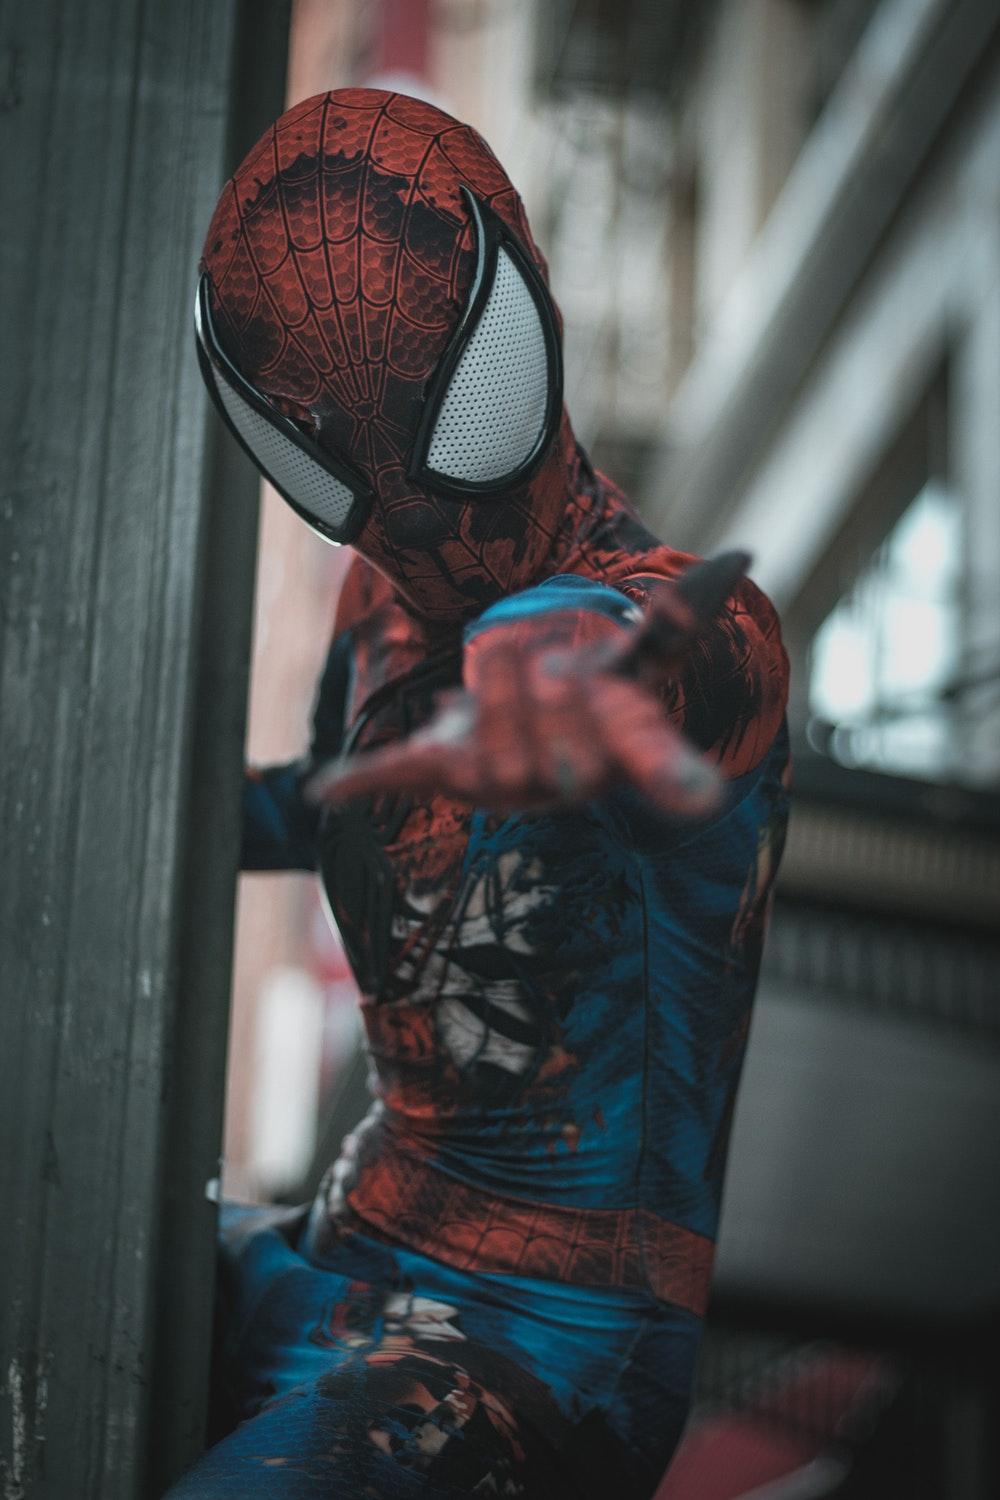 Superhero Picture [HD]. Download Free Image